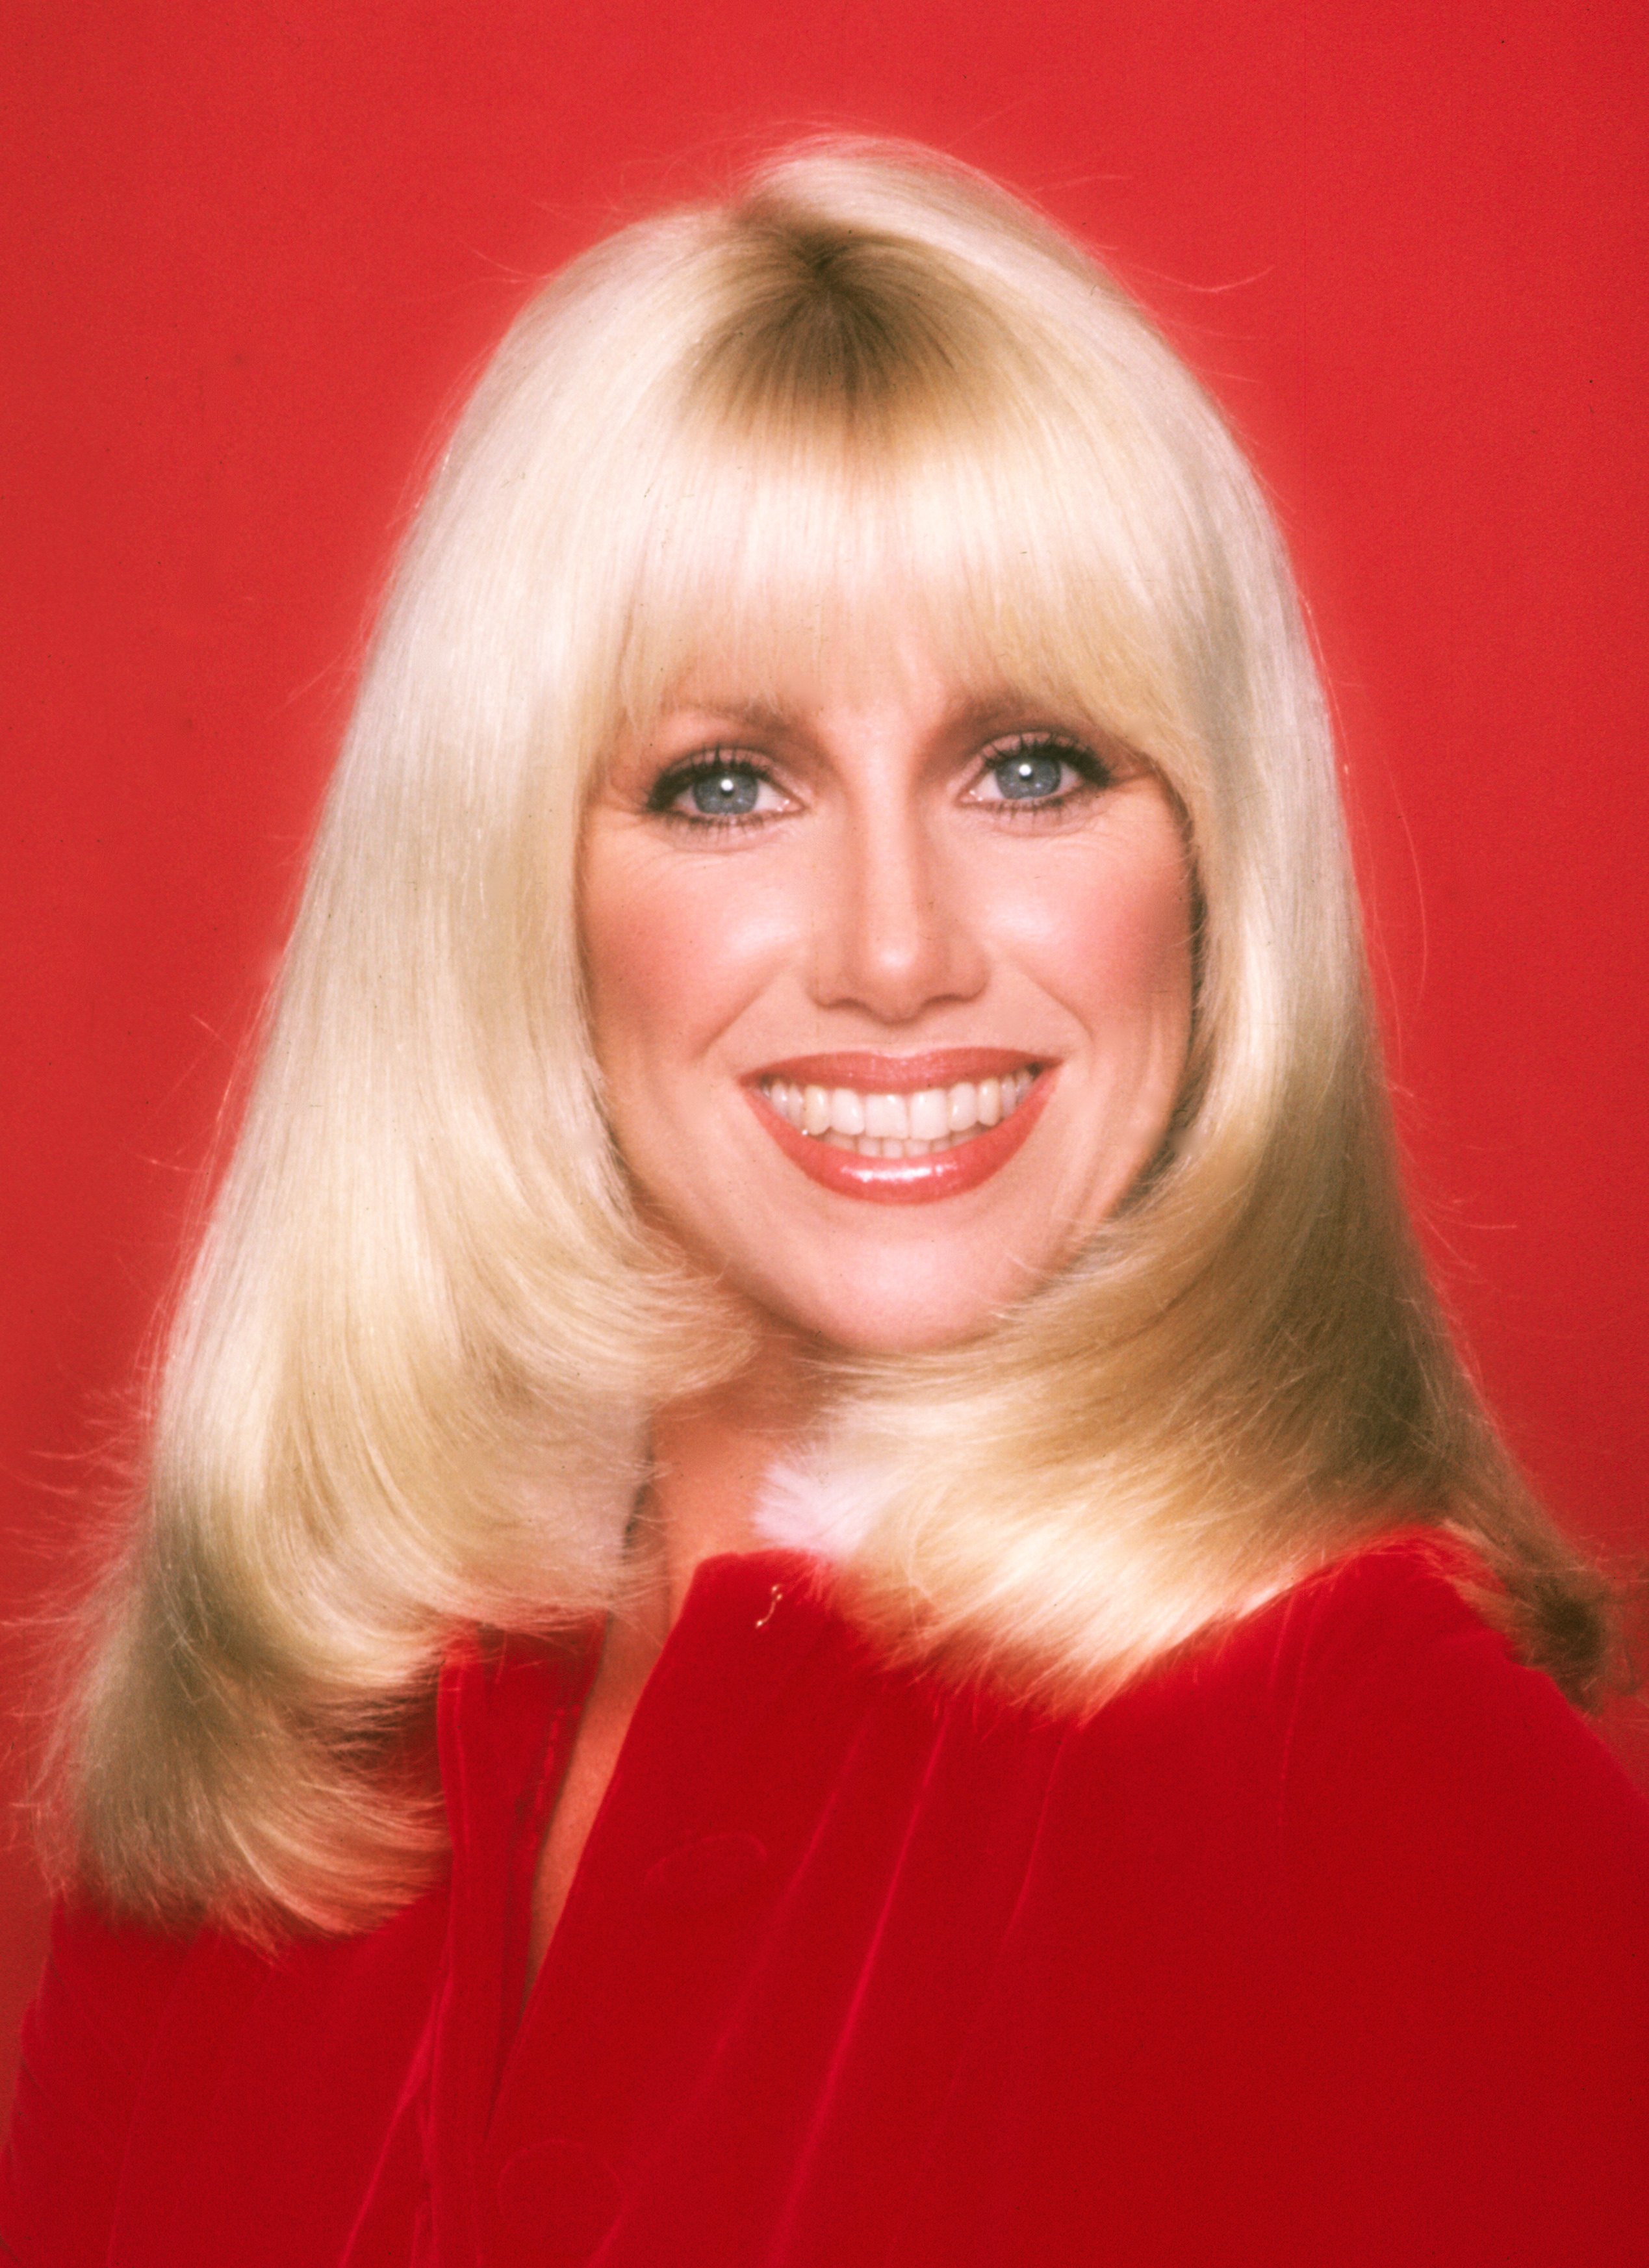 Suzanne Somers poses for a portrait in Los Angeles, California, in 1979 | Source: Getty Images